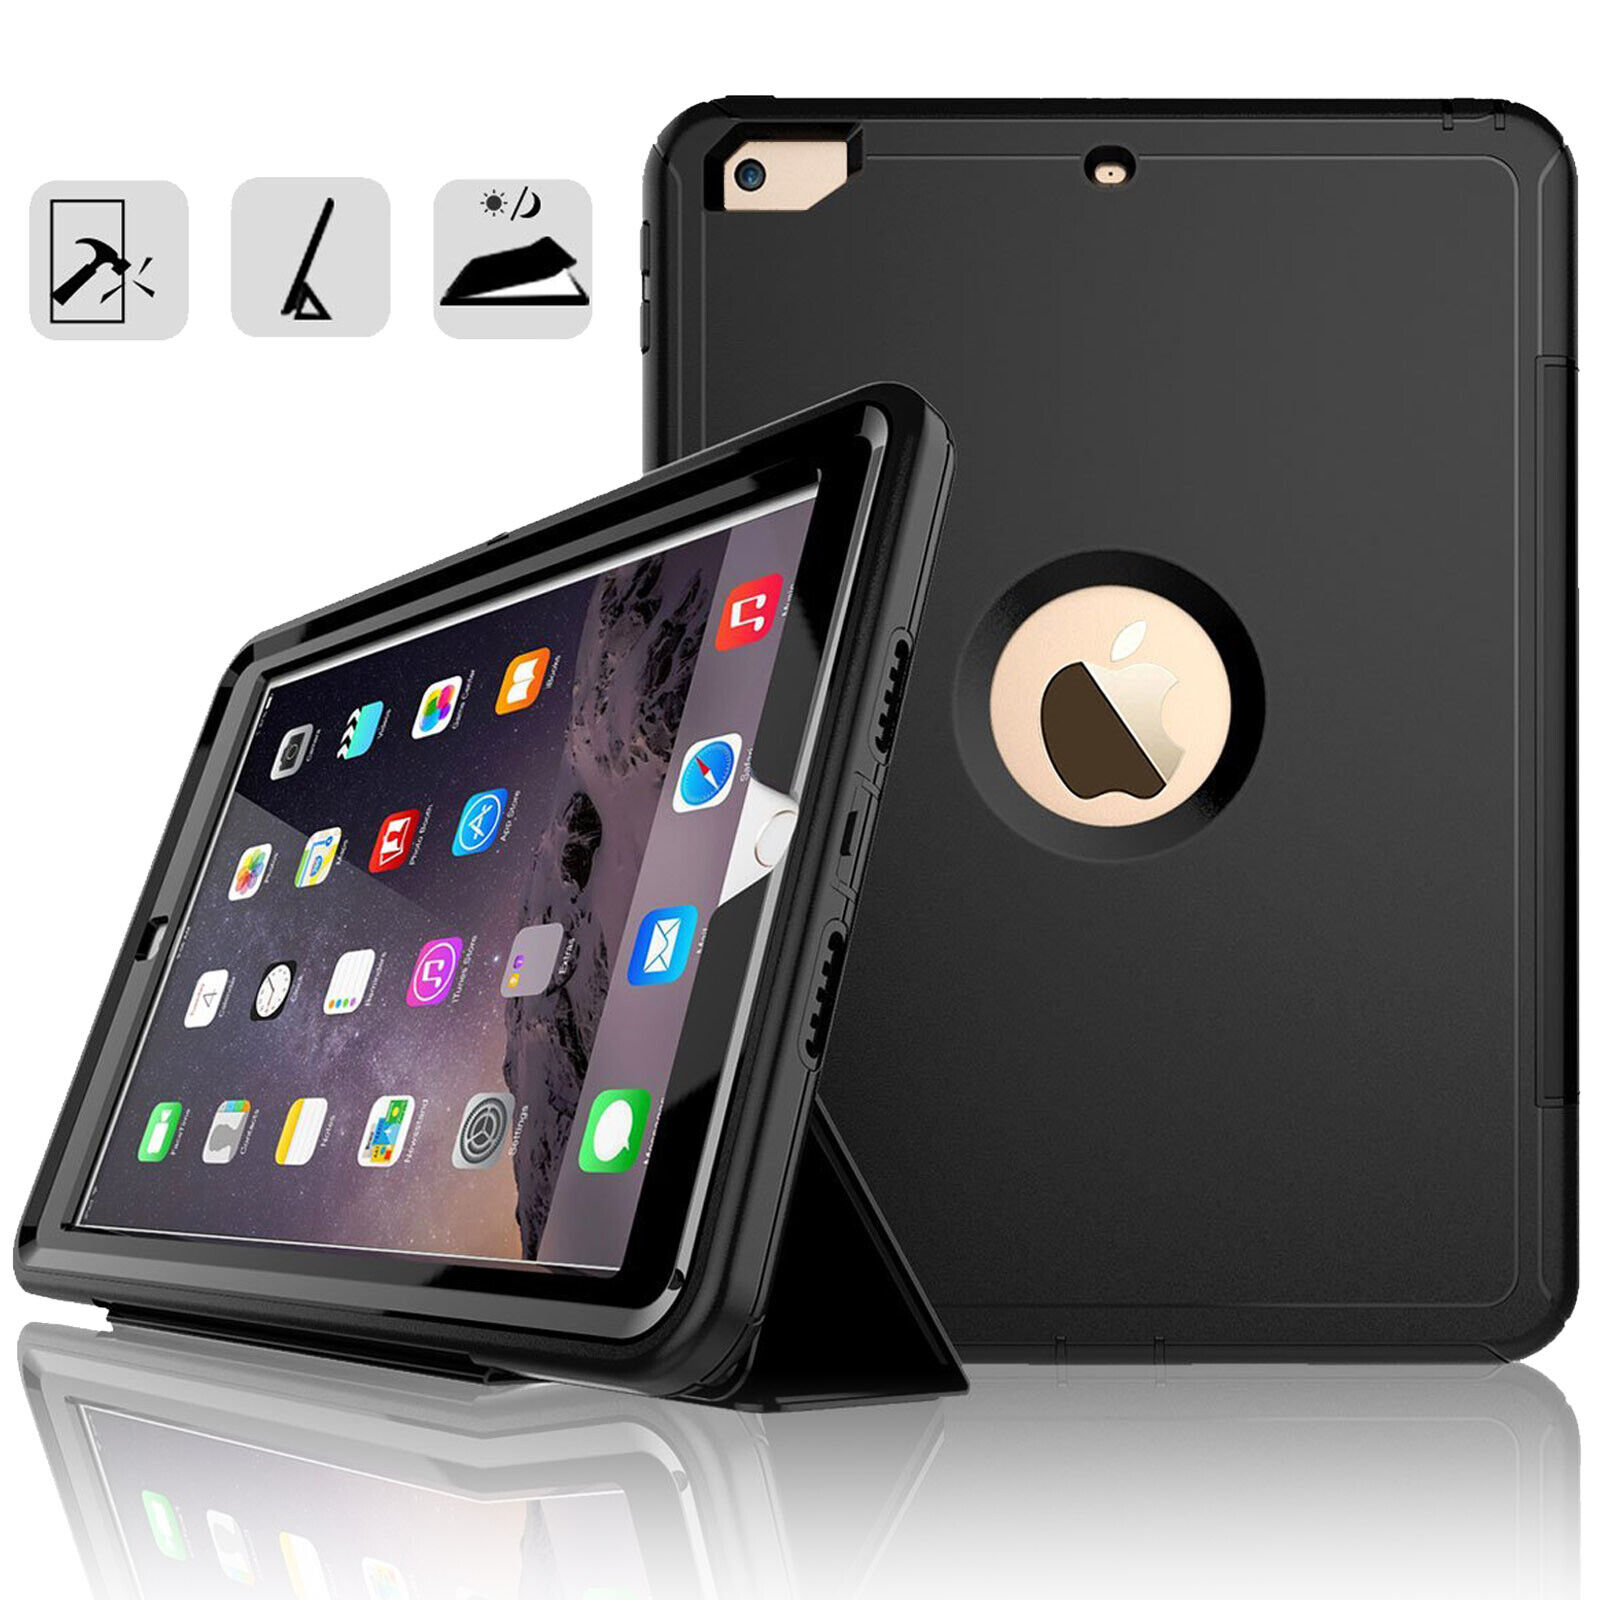 [Full-body] Drop-Proof&Shockproof Hybrid Armour Case for 2017 iPad 5th Gen Cover